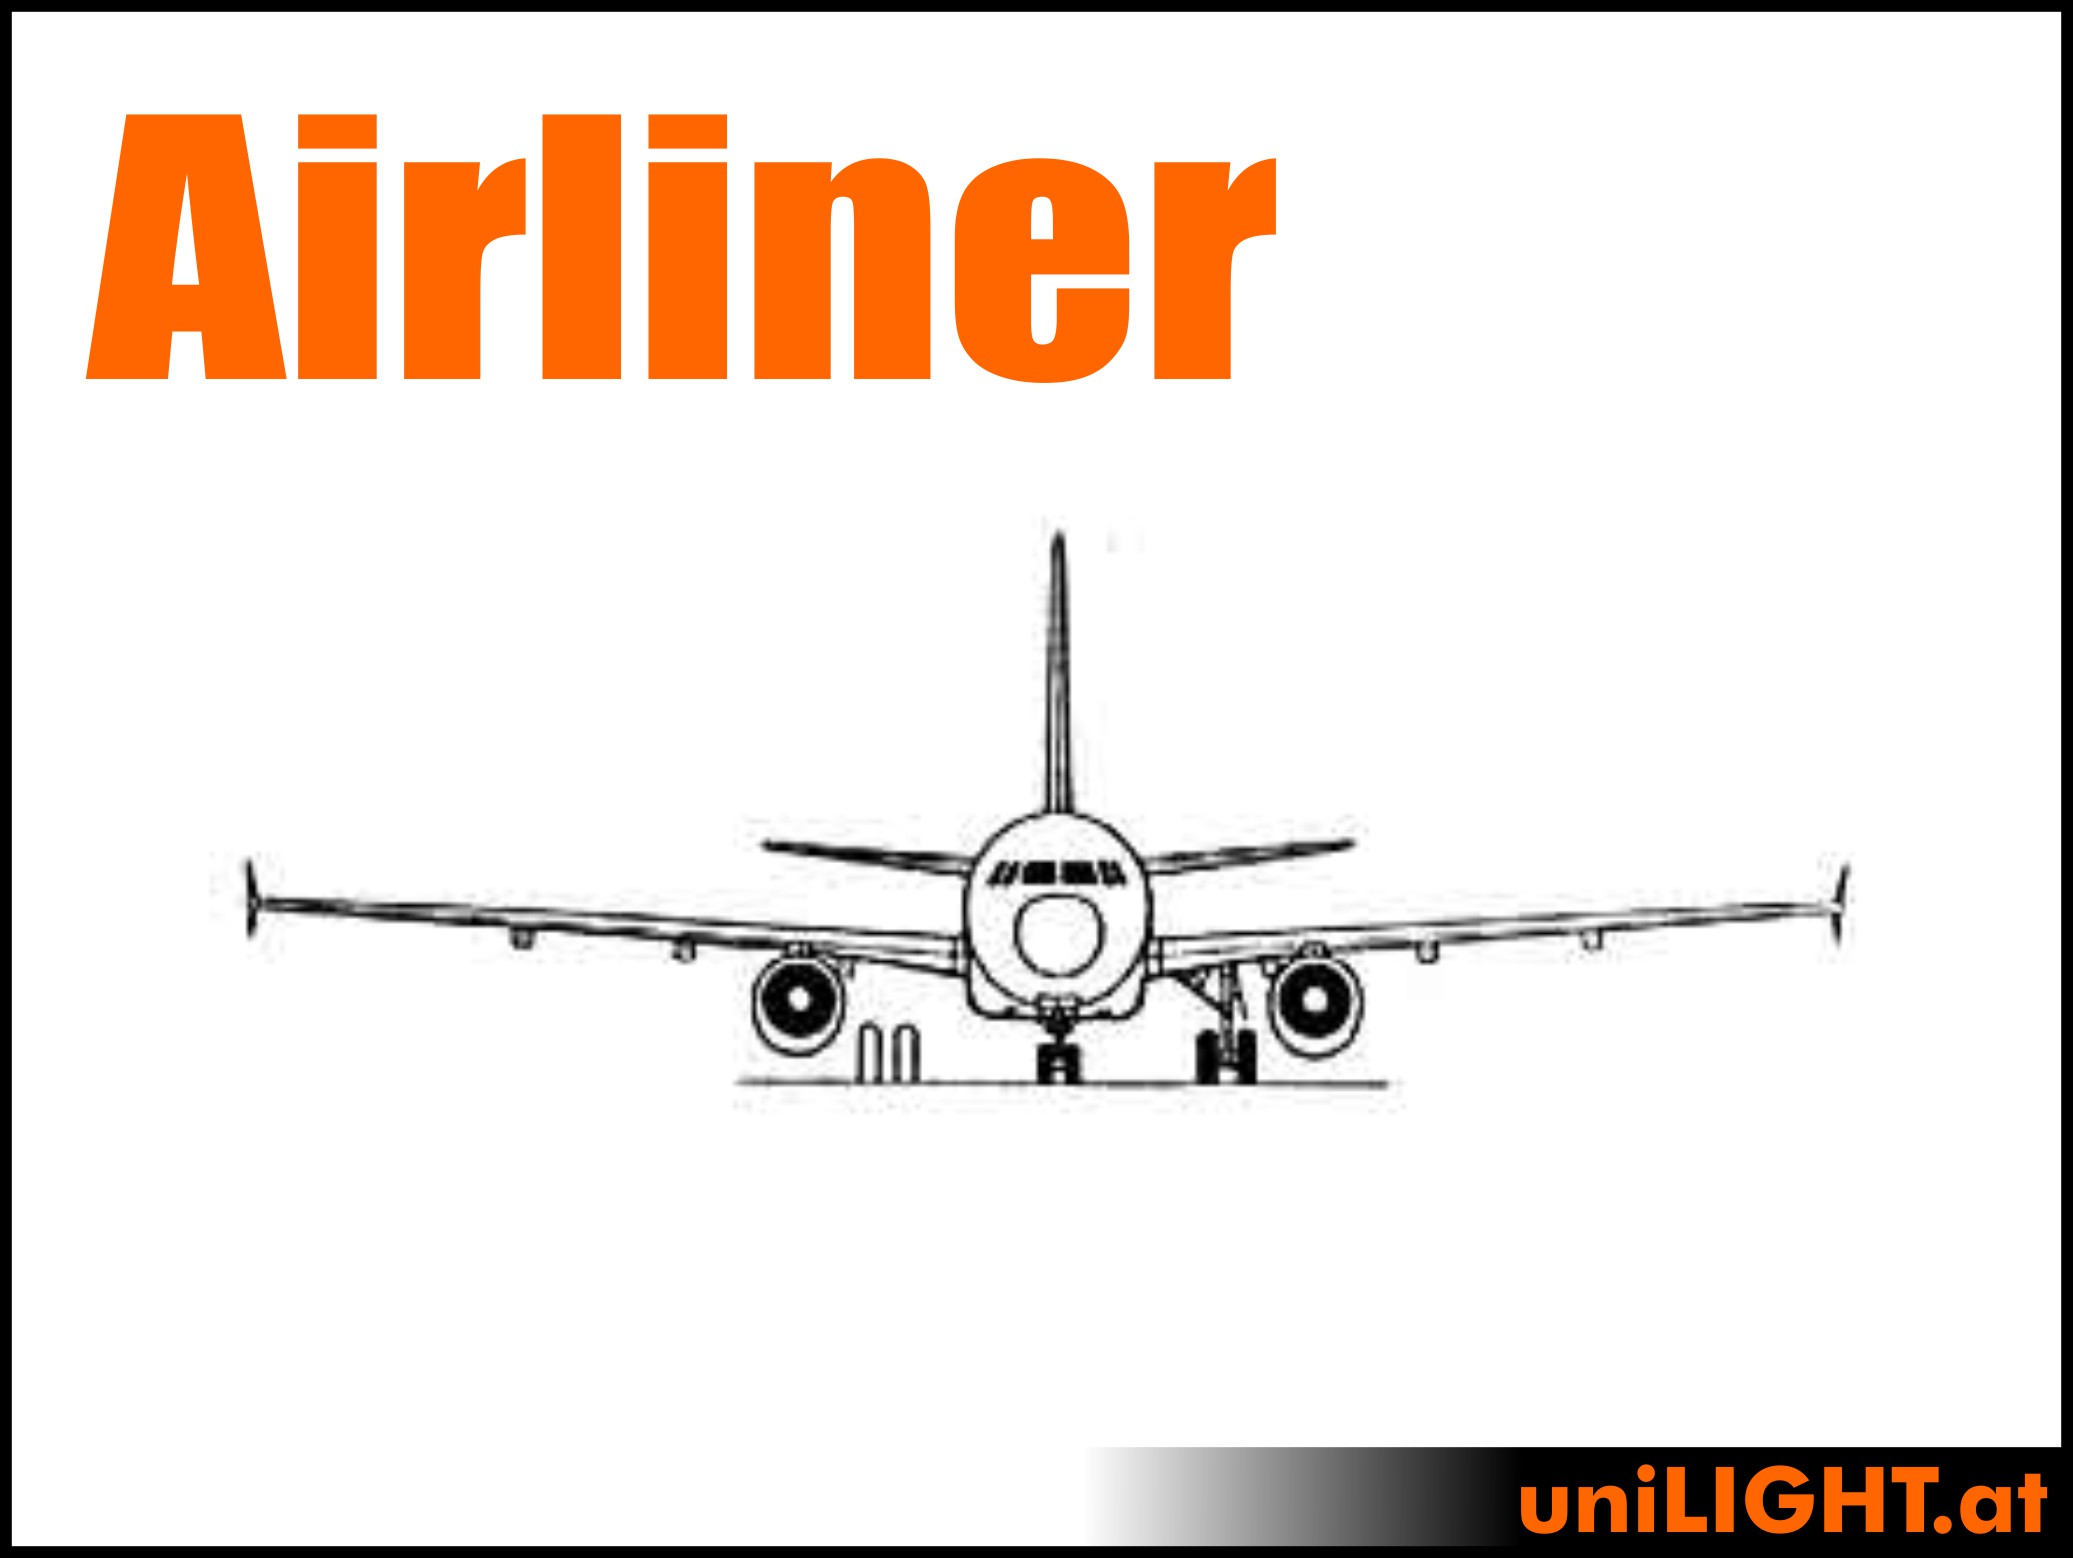 Airliner (BOING, AIRBUS)